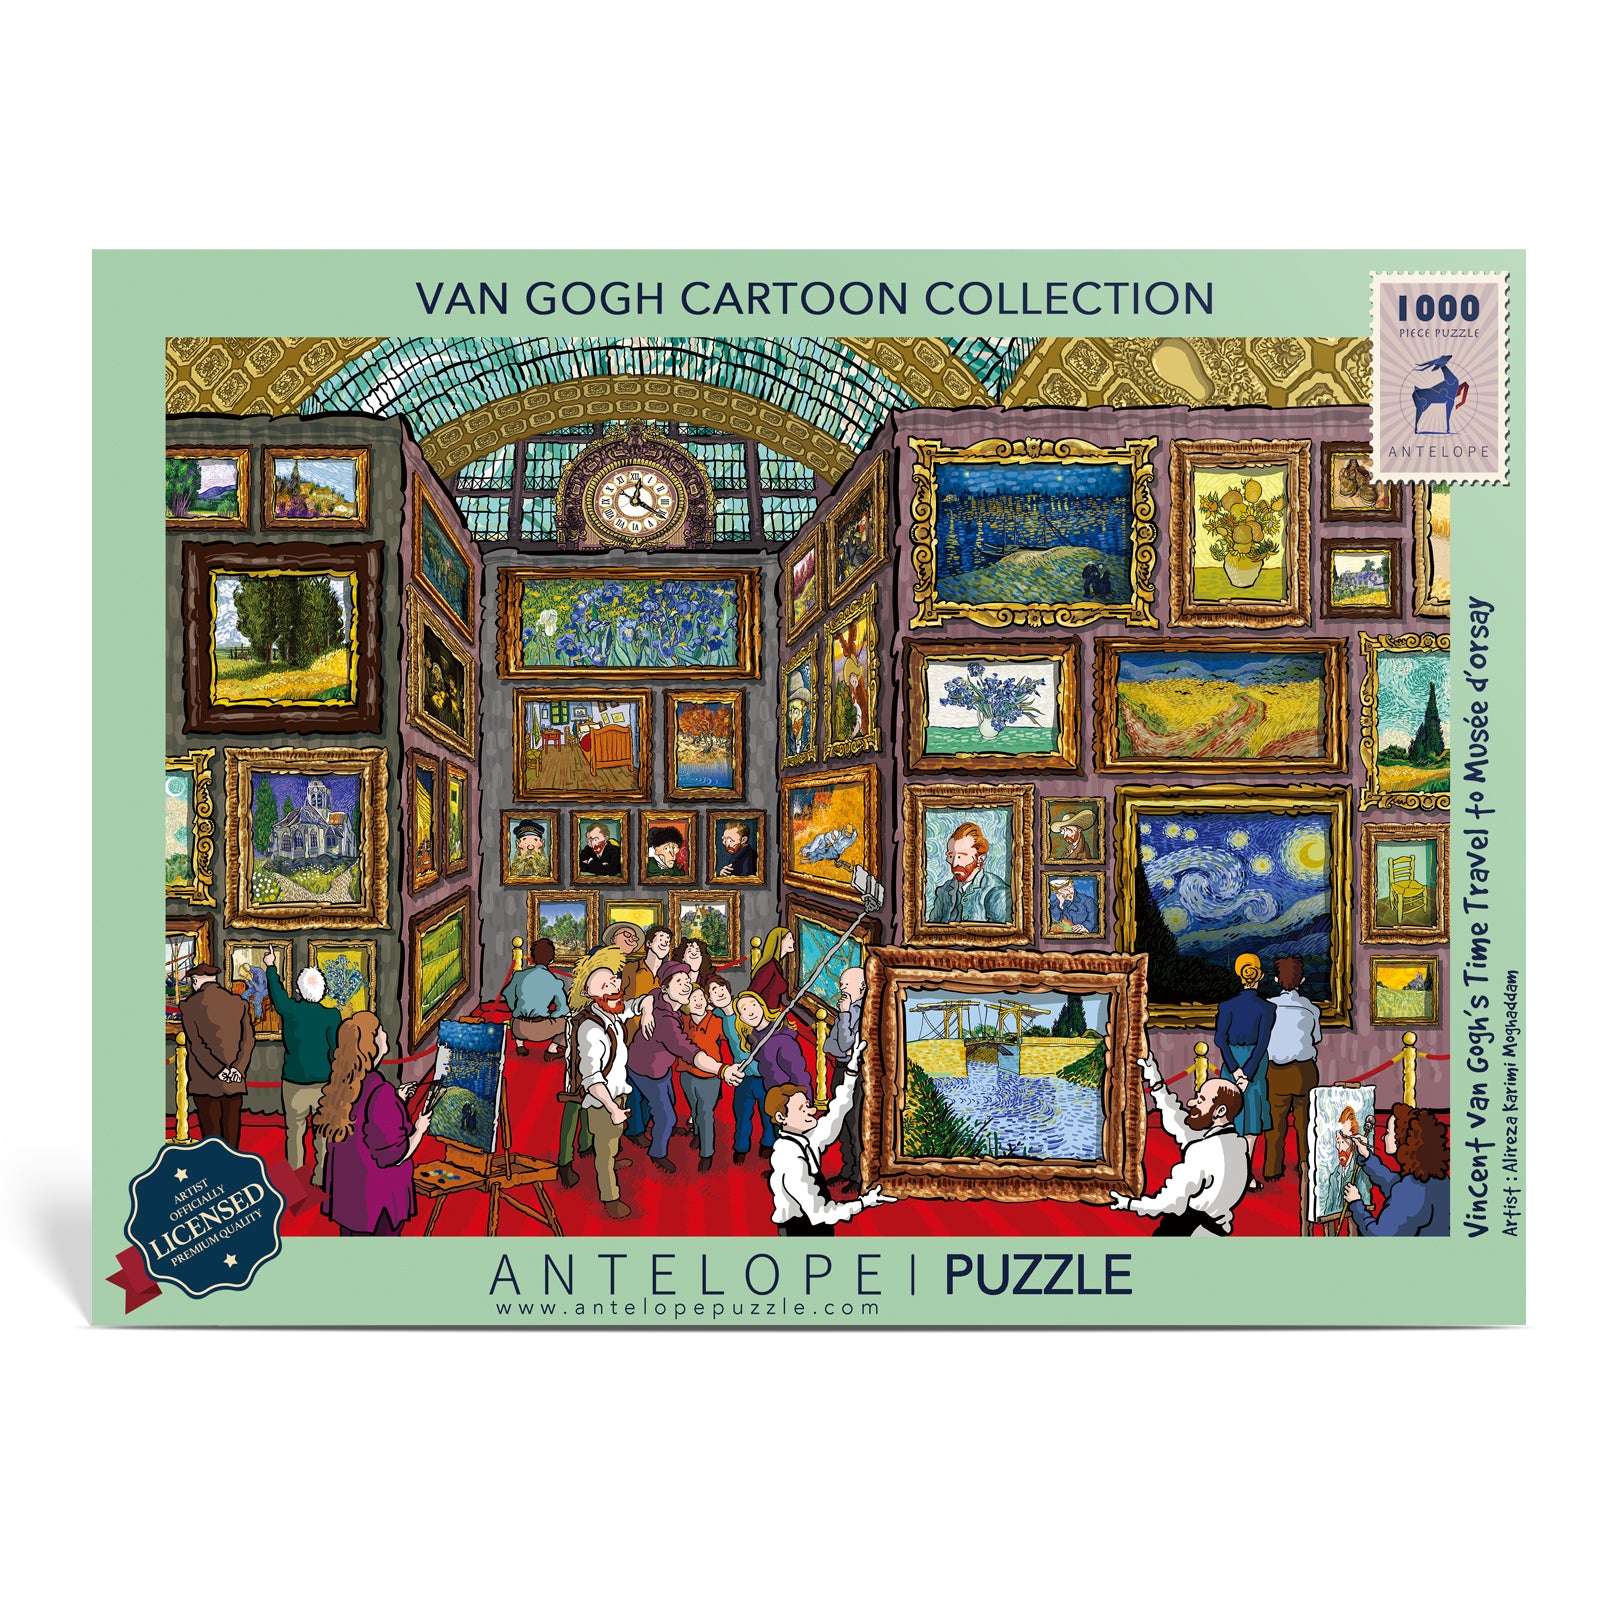 Vincent van Gogh's Time Travel to Musée d'Orsay 1000 Piece Jigsaw Puzz –  ANTELOPE PUZZLE